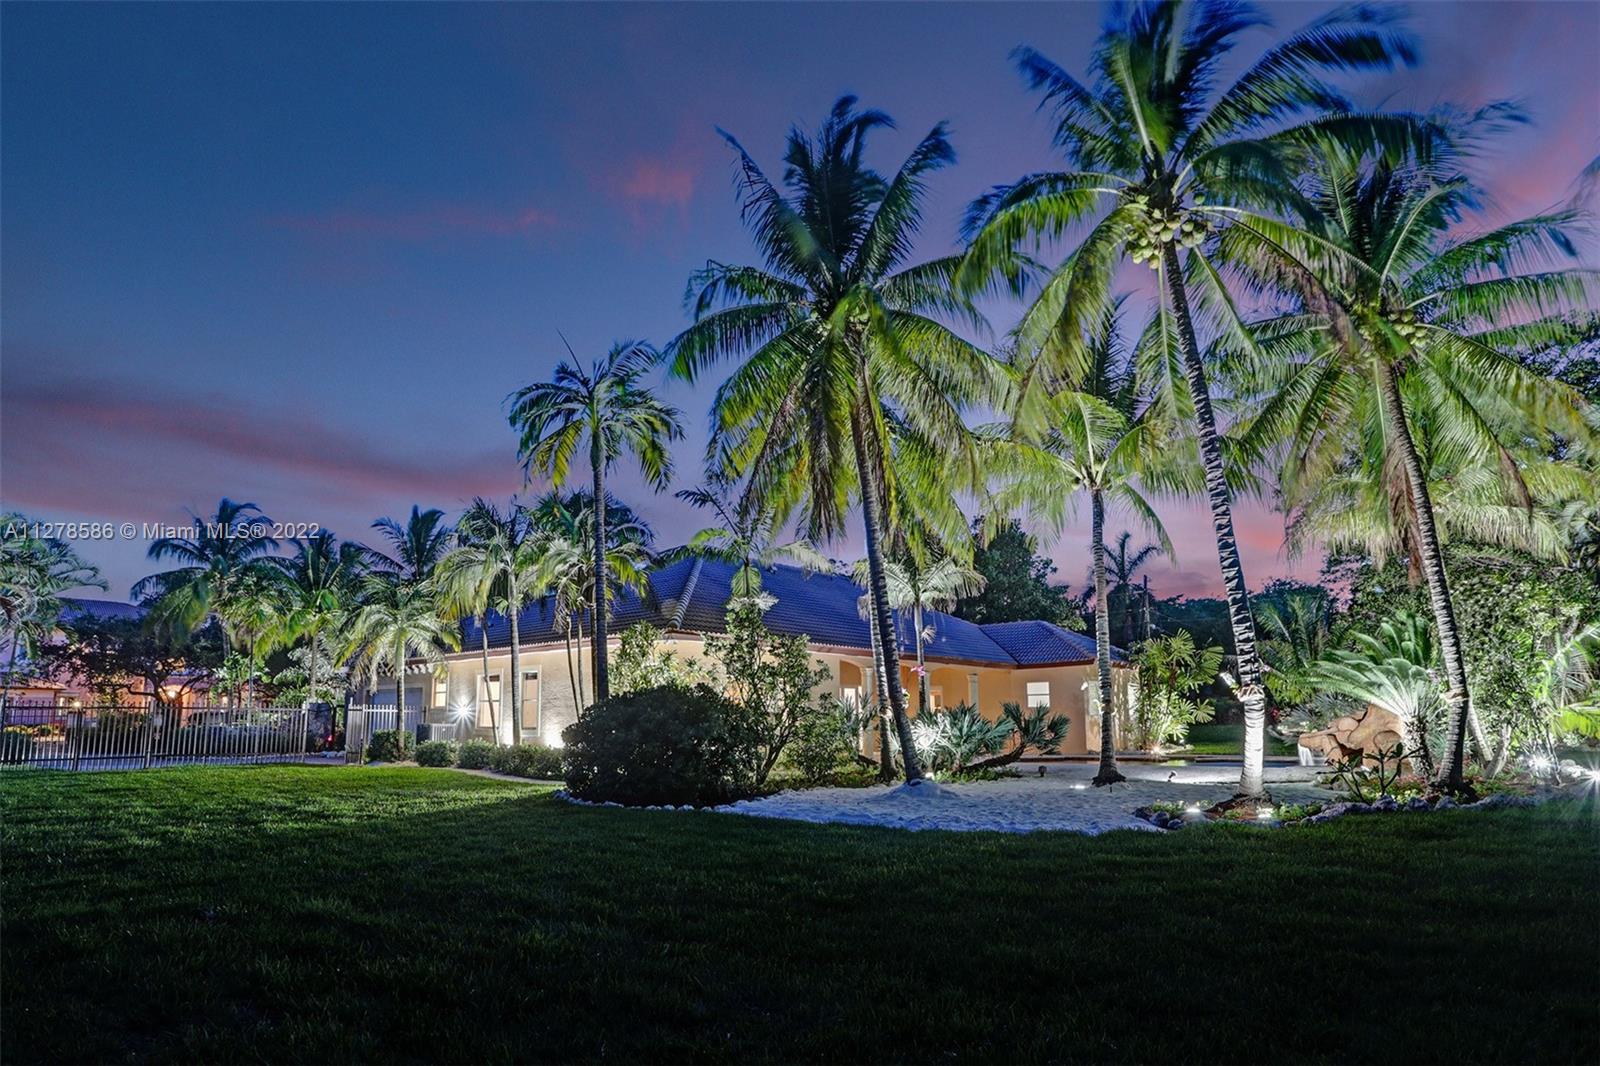 A Tropical Paradise Awaits. Nestled on a corner lot in one of the most sought-after areas in South Miami, this 5Bd/4Ba is one of only 9 exclusive homes that make up Ambience Estates. From the rare coral rock wall that encompasses the front perimeter to the custom, saltwater lagoon pool & waterfall in the back, this private oasis meshes opulence with tranquility. Step inside to elegant stone flooring throughout, soaring ceilings, formal living/dining rooms, & an oversized master suite with dual walk-in closets & access to the large covered terrace. Entertain outside on the coral rock pool & spa deck, amidst the professional & lush landscaping, surrounded by gorgeous palms swaying over your own personal beach. Live luxuriously in an ultra-quiet neighborhood in the perfect location.